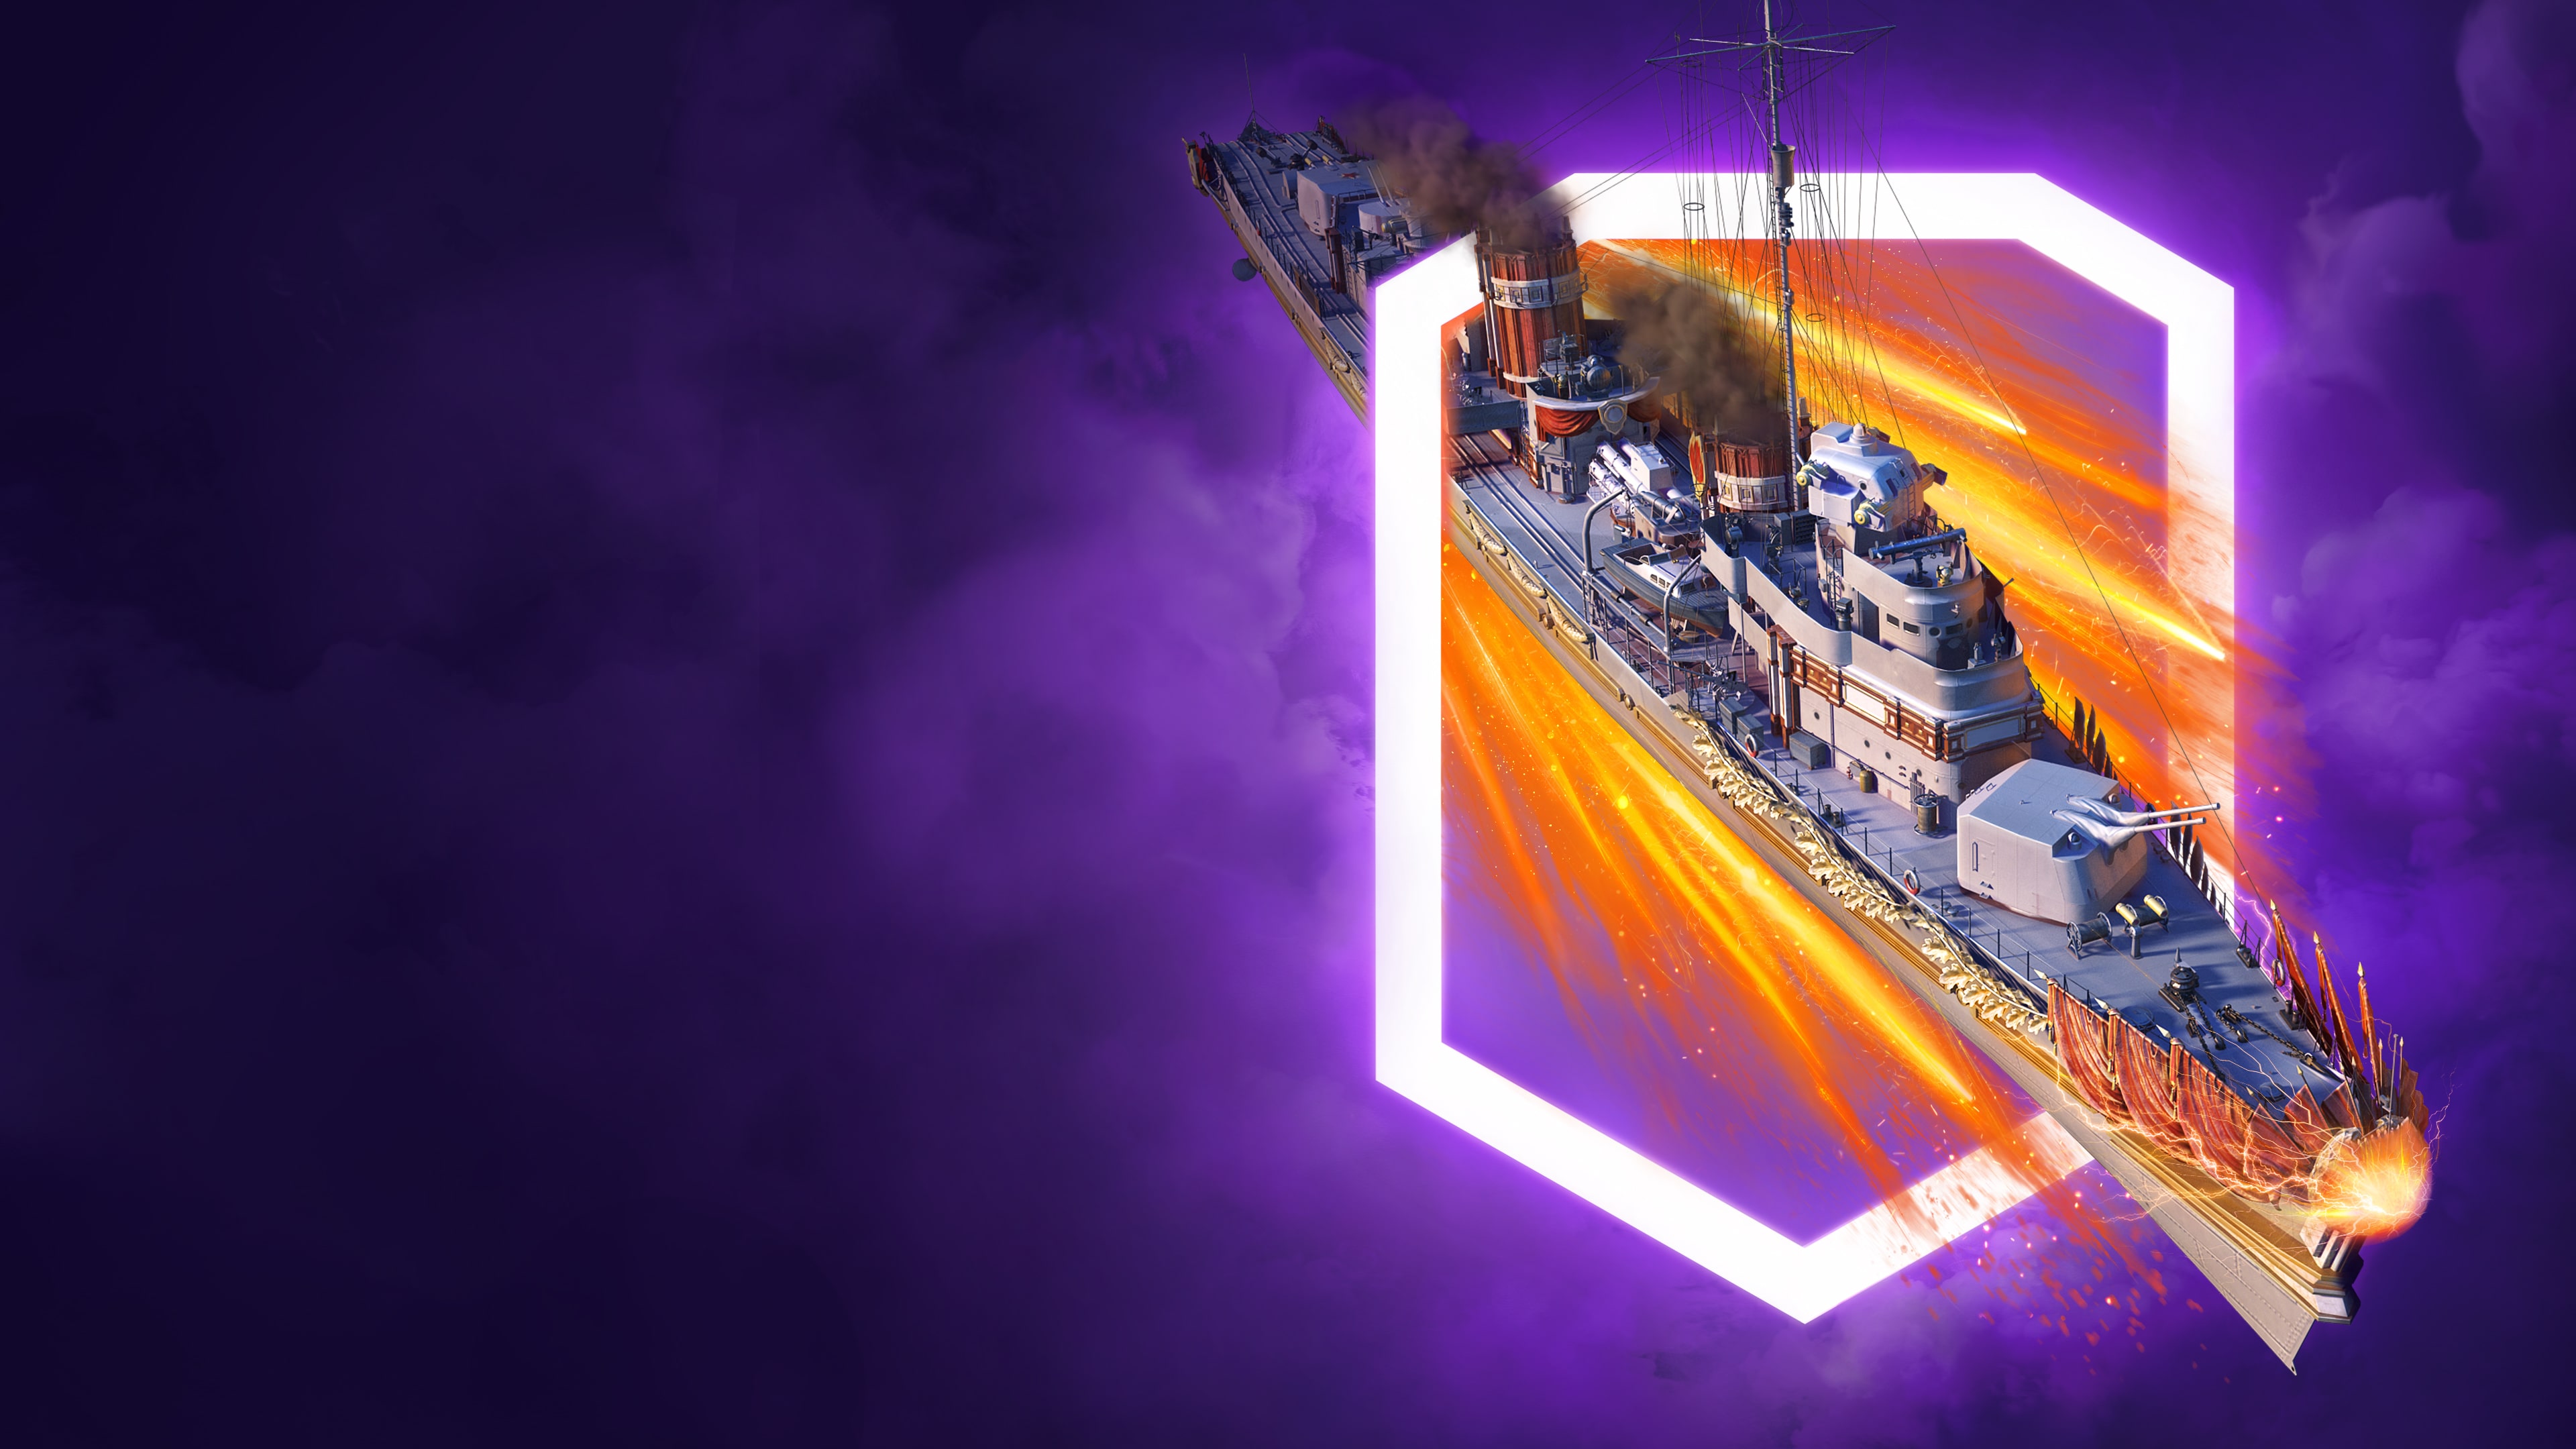 World of Warships: Legends — PS4 Back in Red